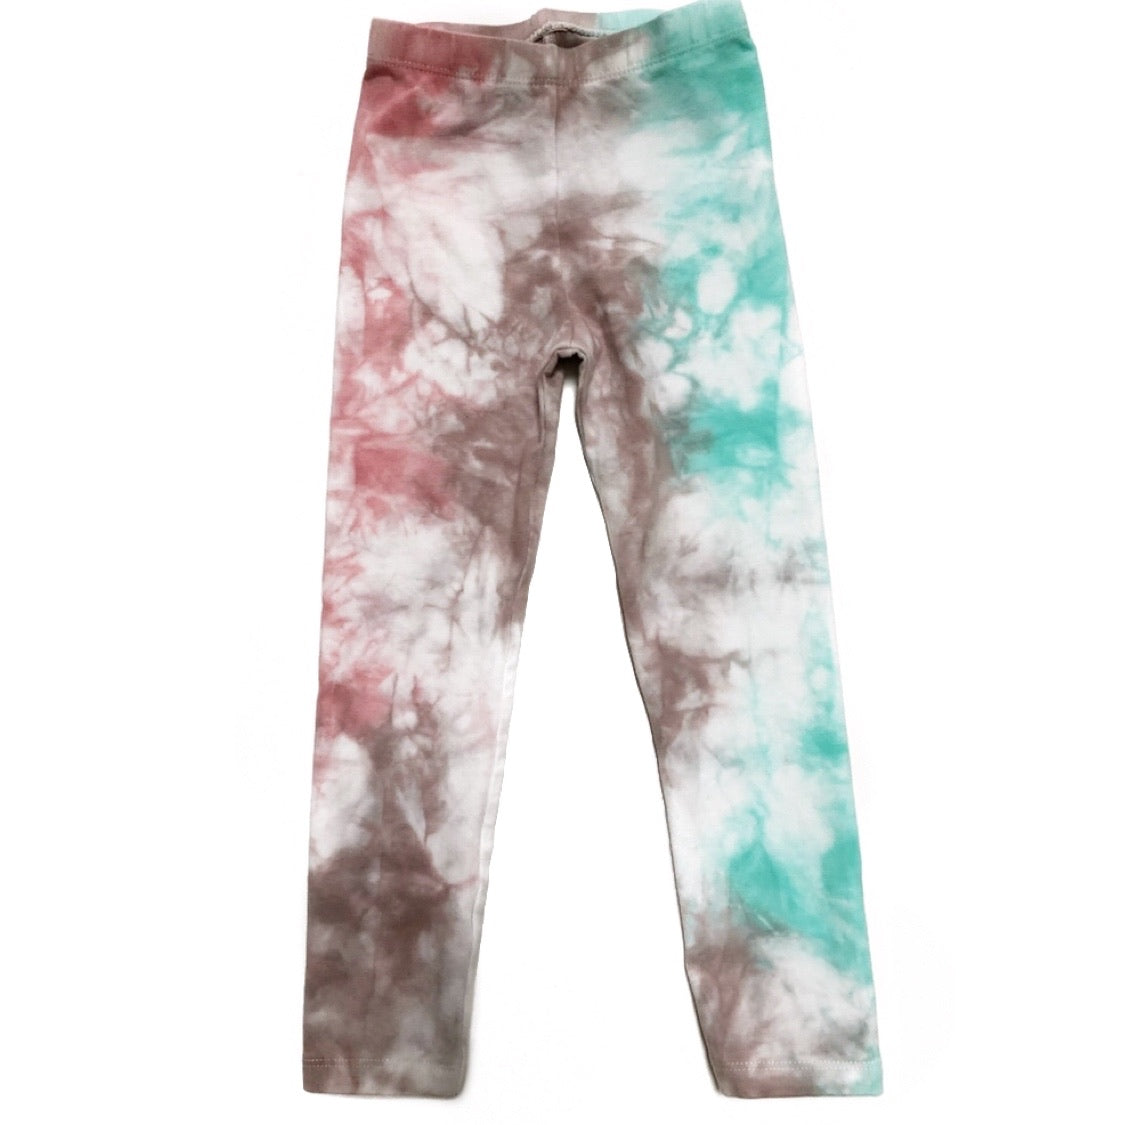 Rose, Taupe and Mint Tie Dye Leggings